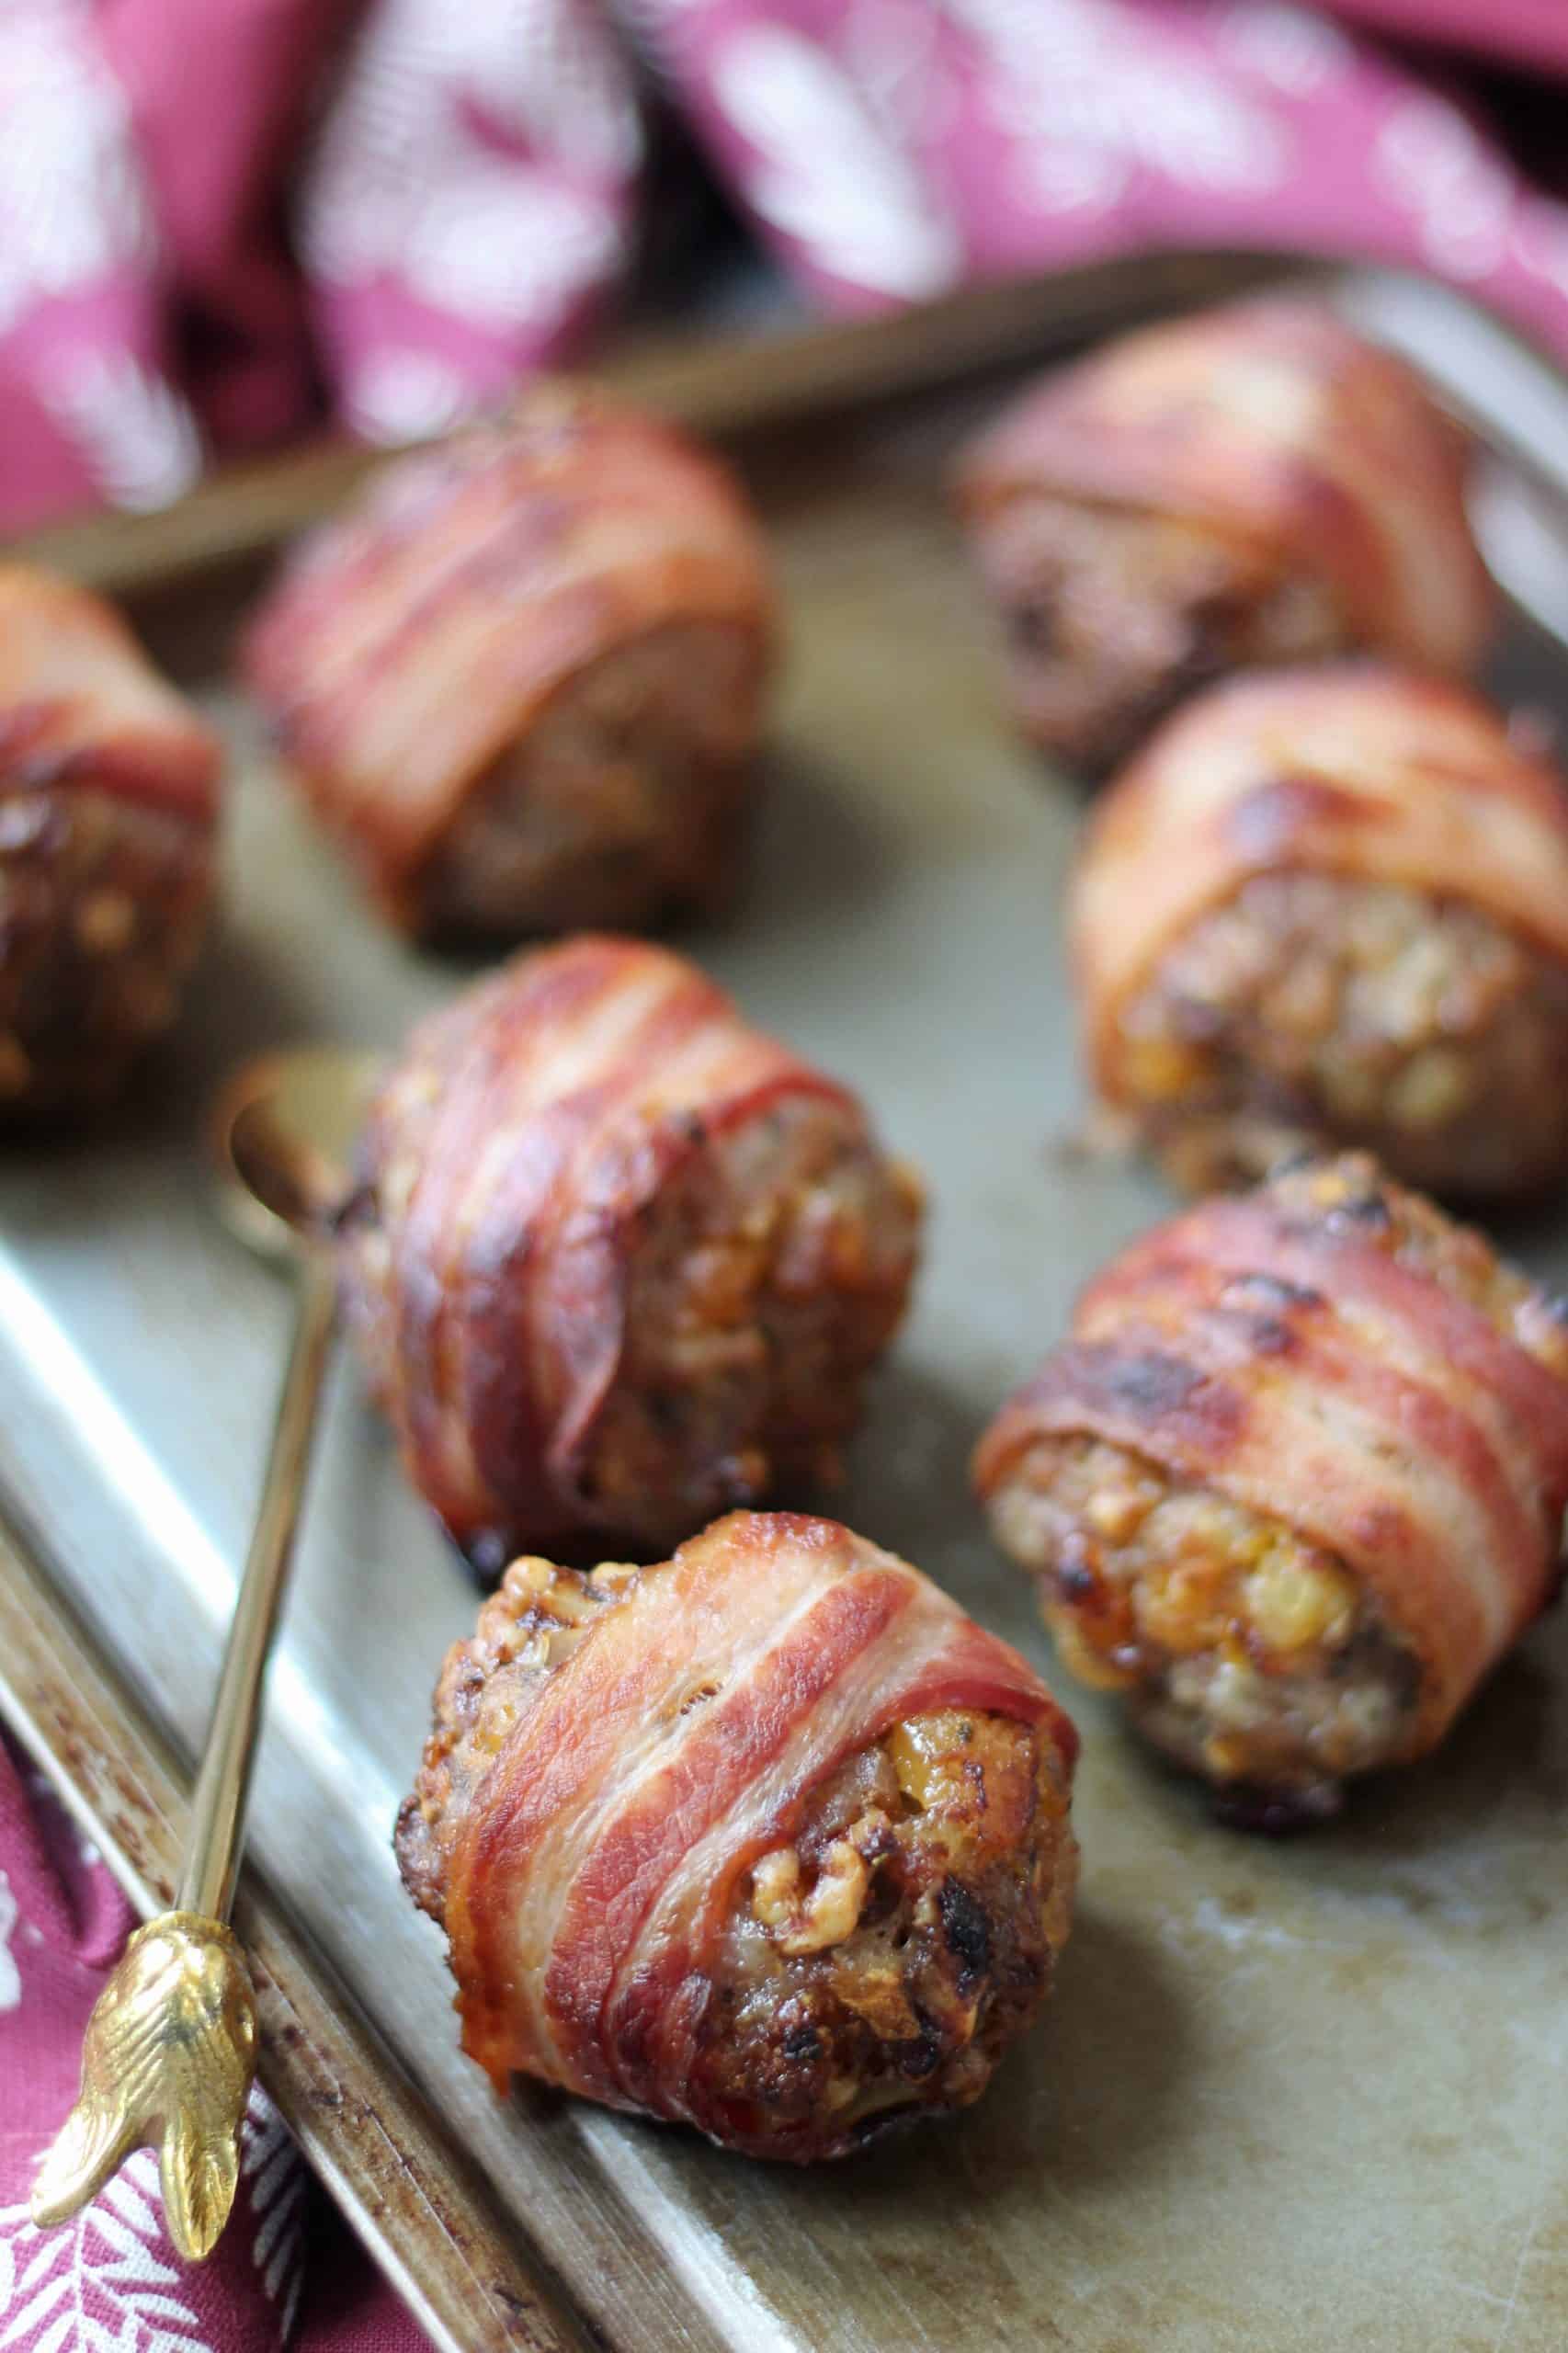 GLUTEN FREE STUFFING BALLS WRAPPED IN BACON